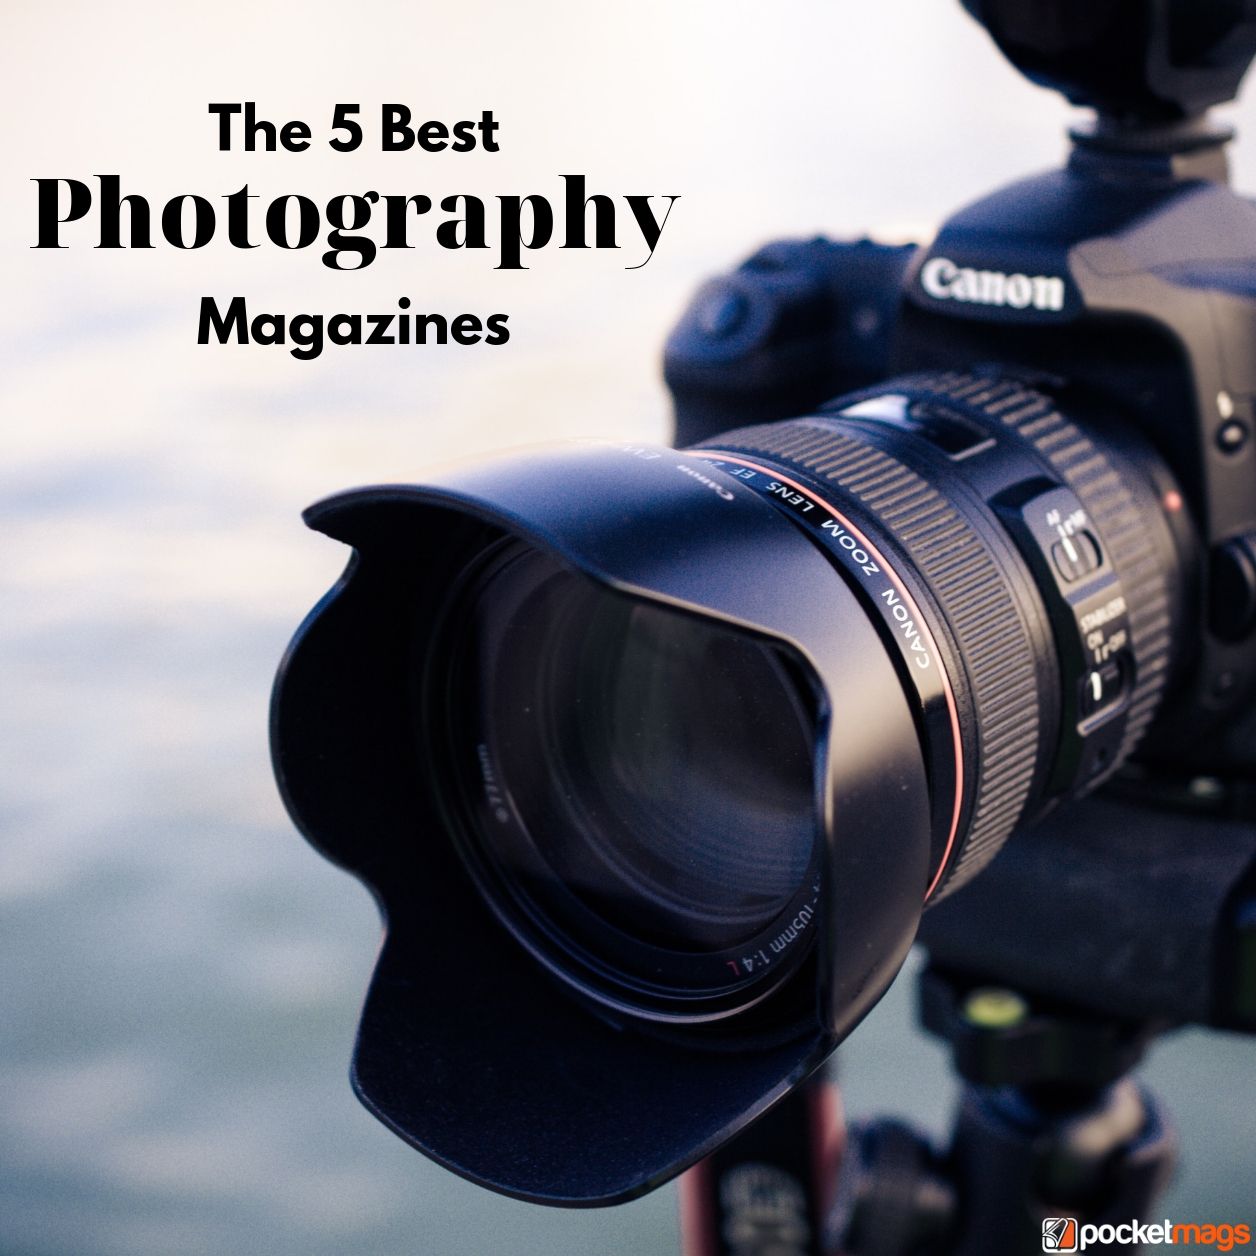 The 5 Best Photography Magazines